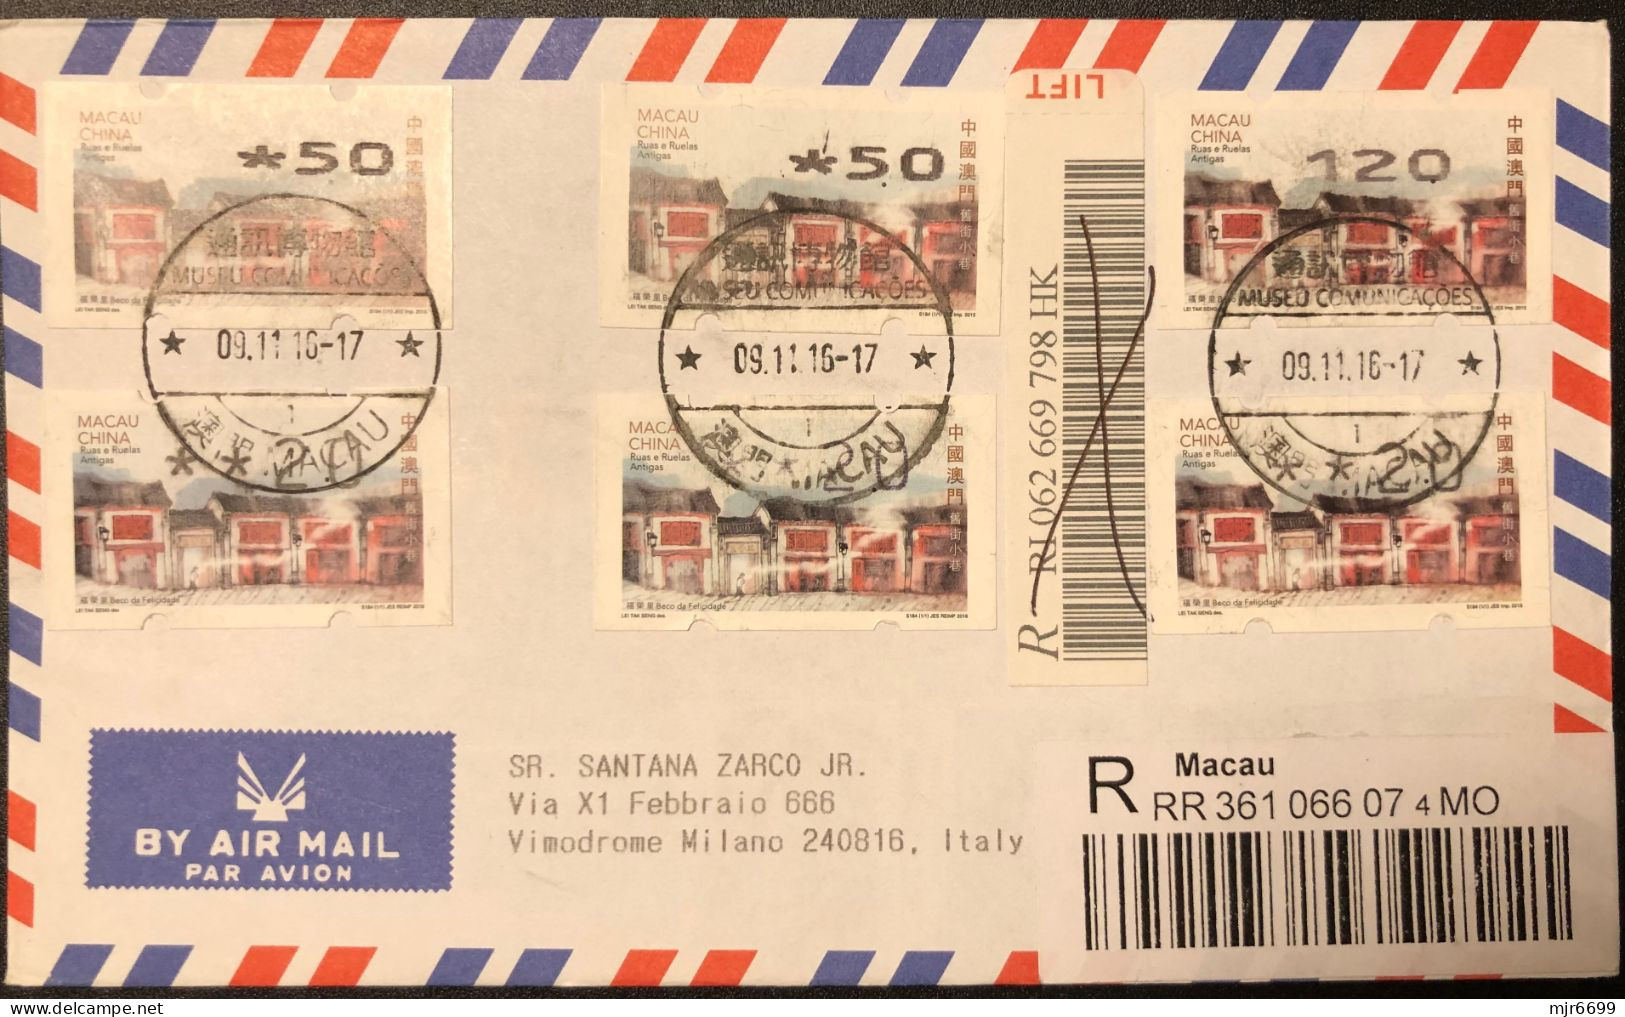 2016 MACAU ATM LABEL OLD STREETS ISSUE, REGISTERED COVER TO ITALY. 12P LABEL WITH PRINTING ERROR, Shift Left. - Distributori